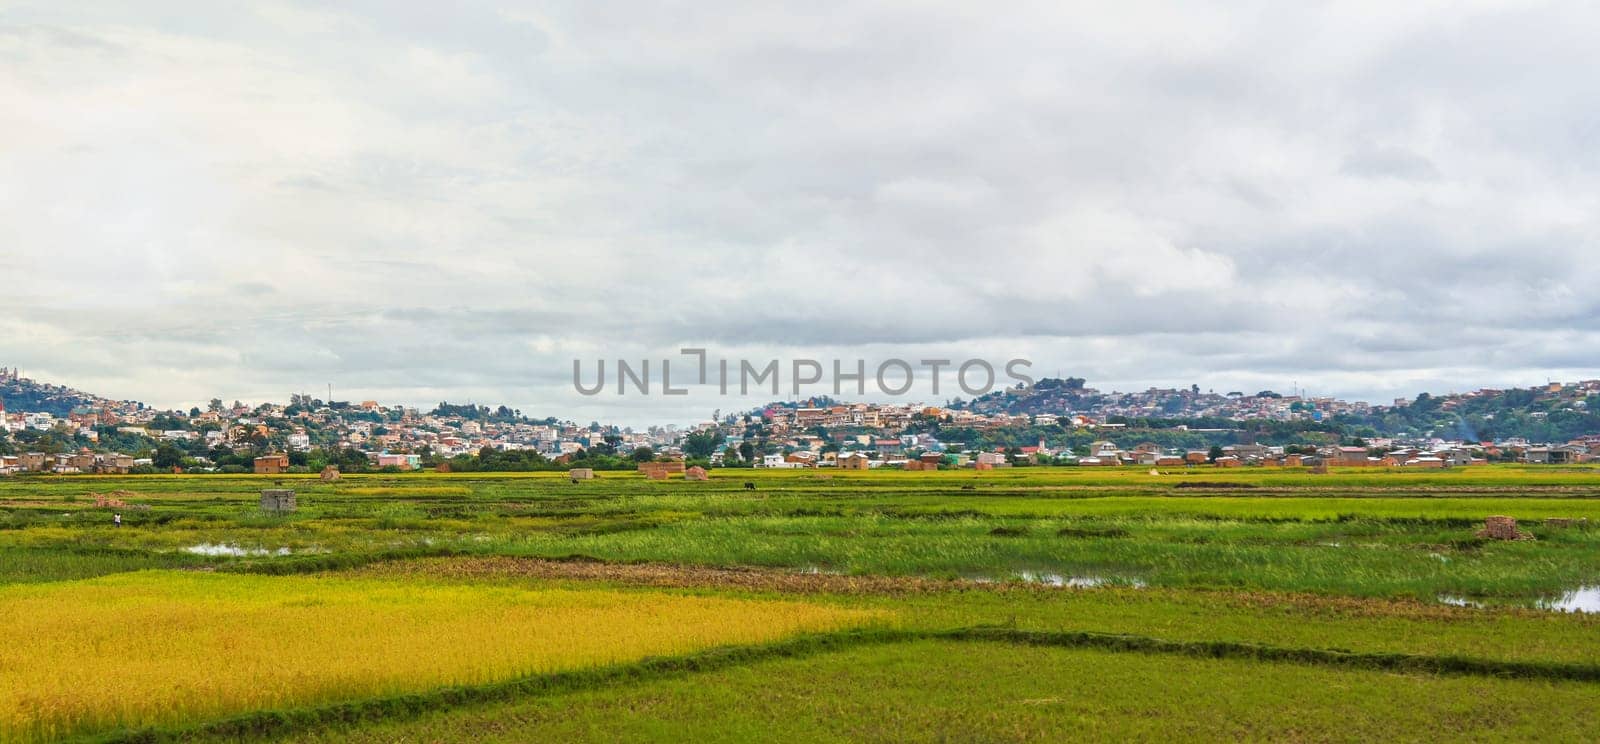 Typical landscape of Madagascar on overcast cloudy day - people working at wet rice fields in foreground, houses on small hills of Antananarivo suburb